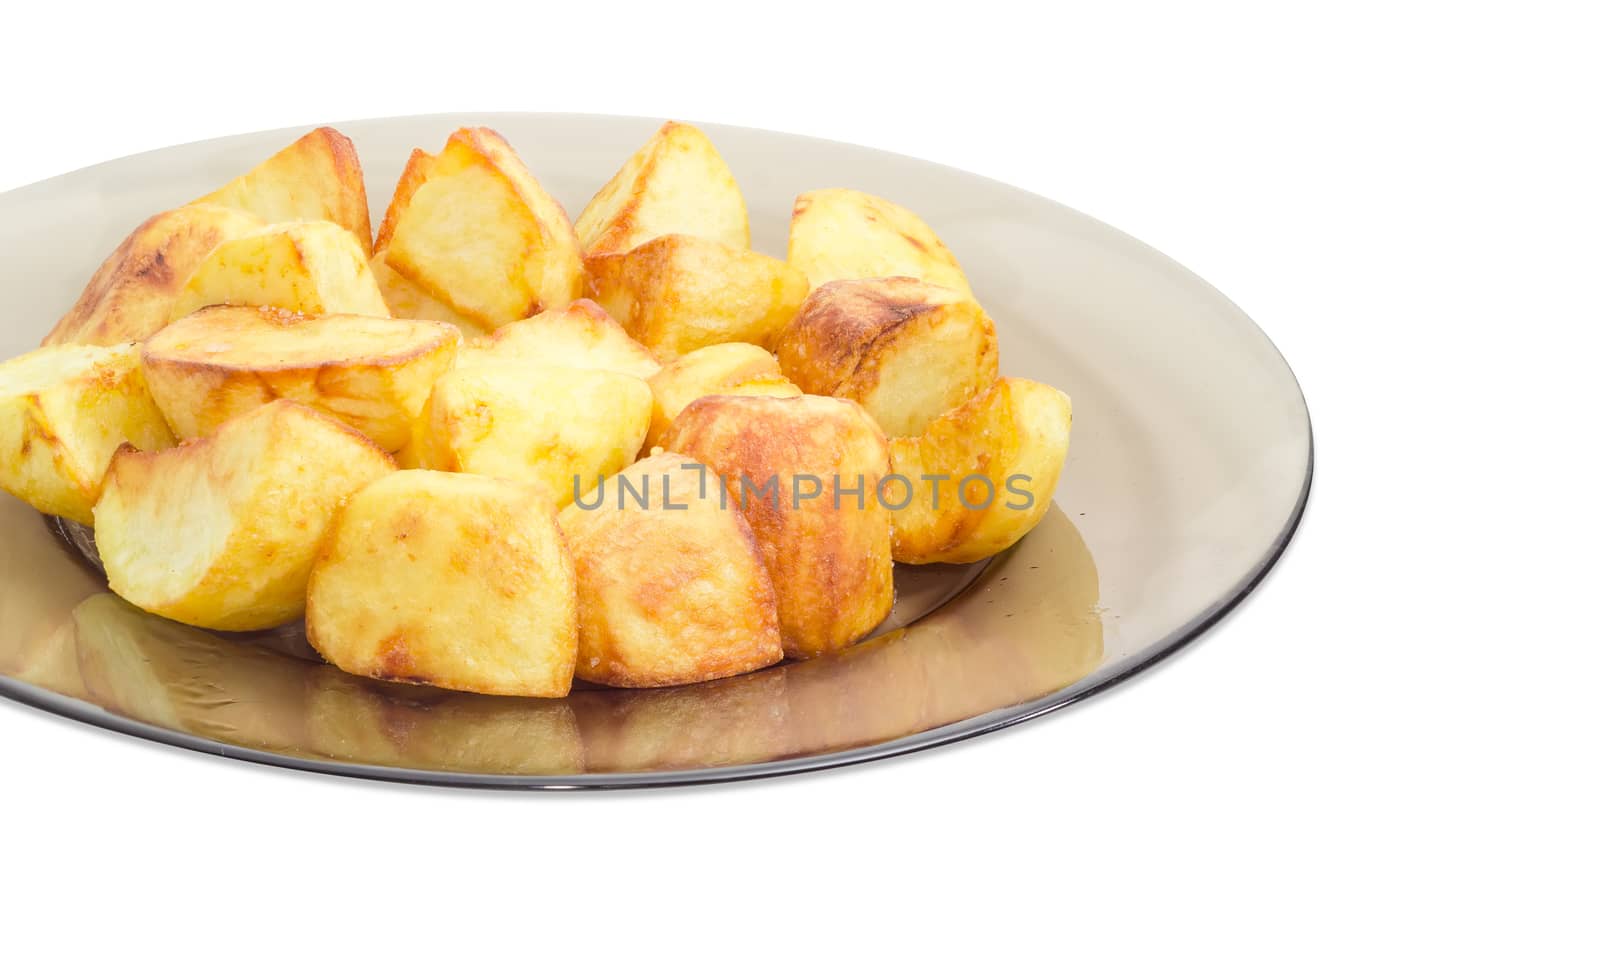 Fragment of the dark glass dish with country style fried potatoes on a light background
